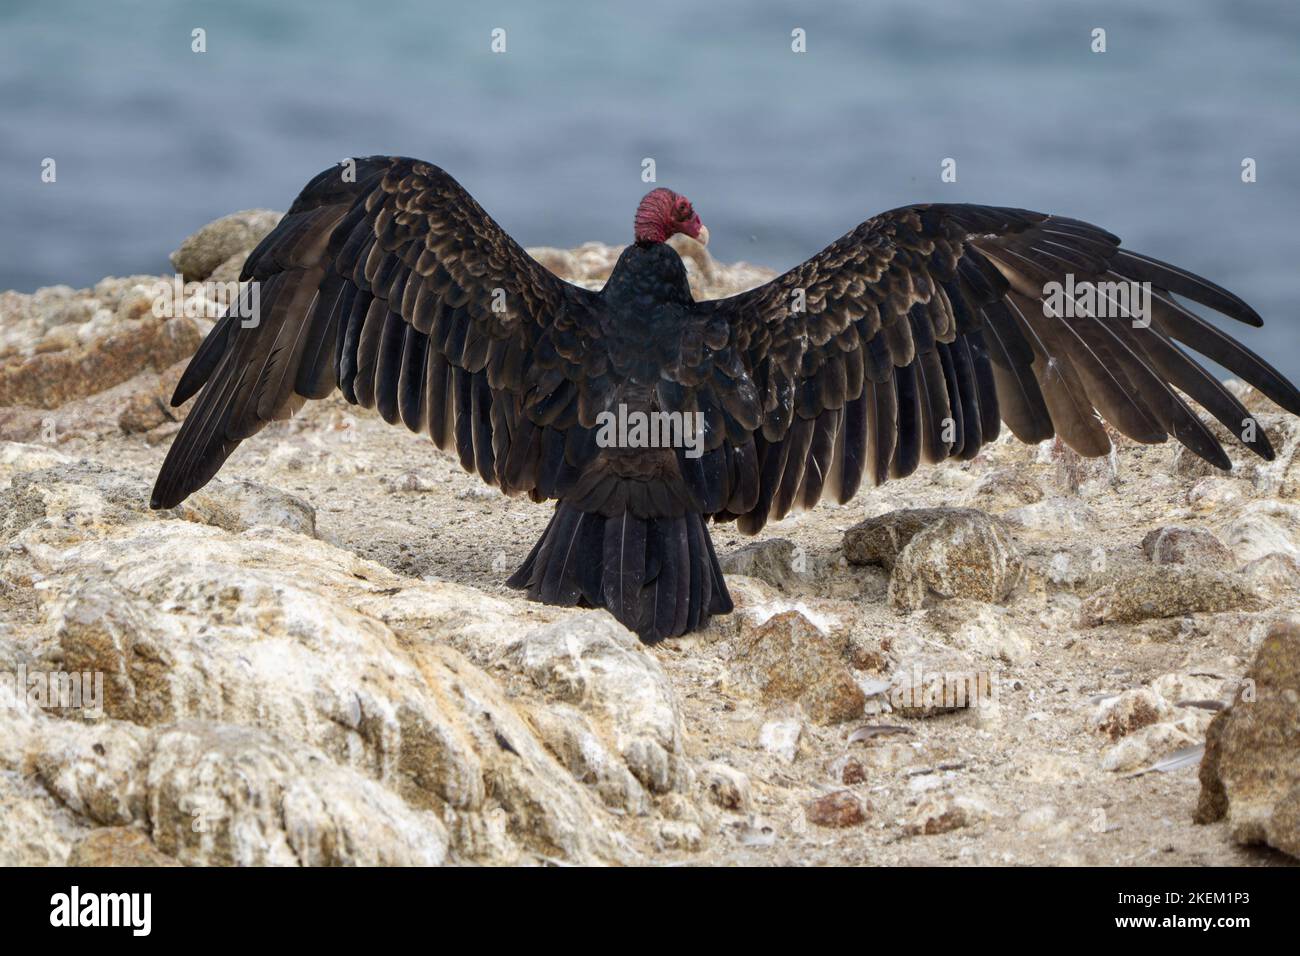 Turkey Vultures spreading its wings at 17 Mile drive, California Stock Photo